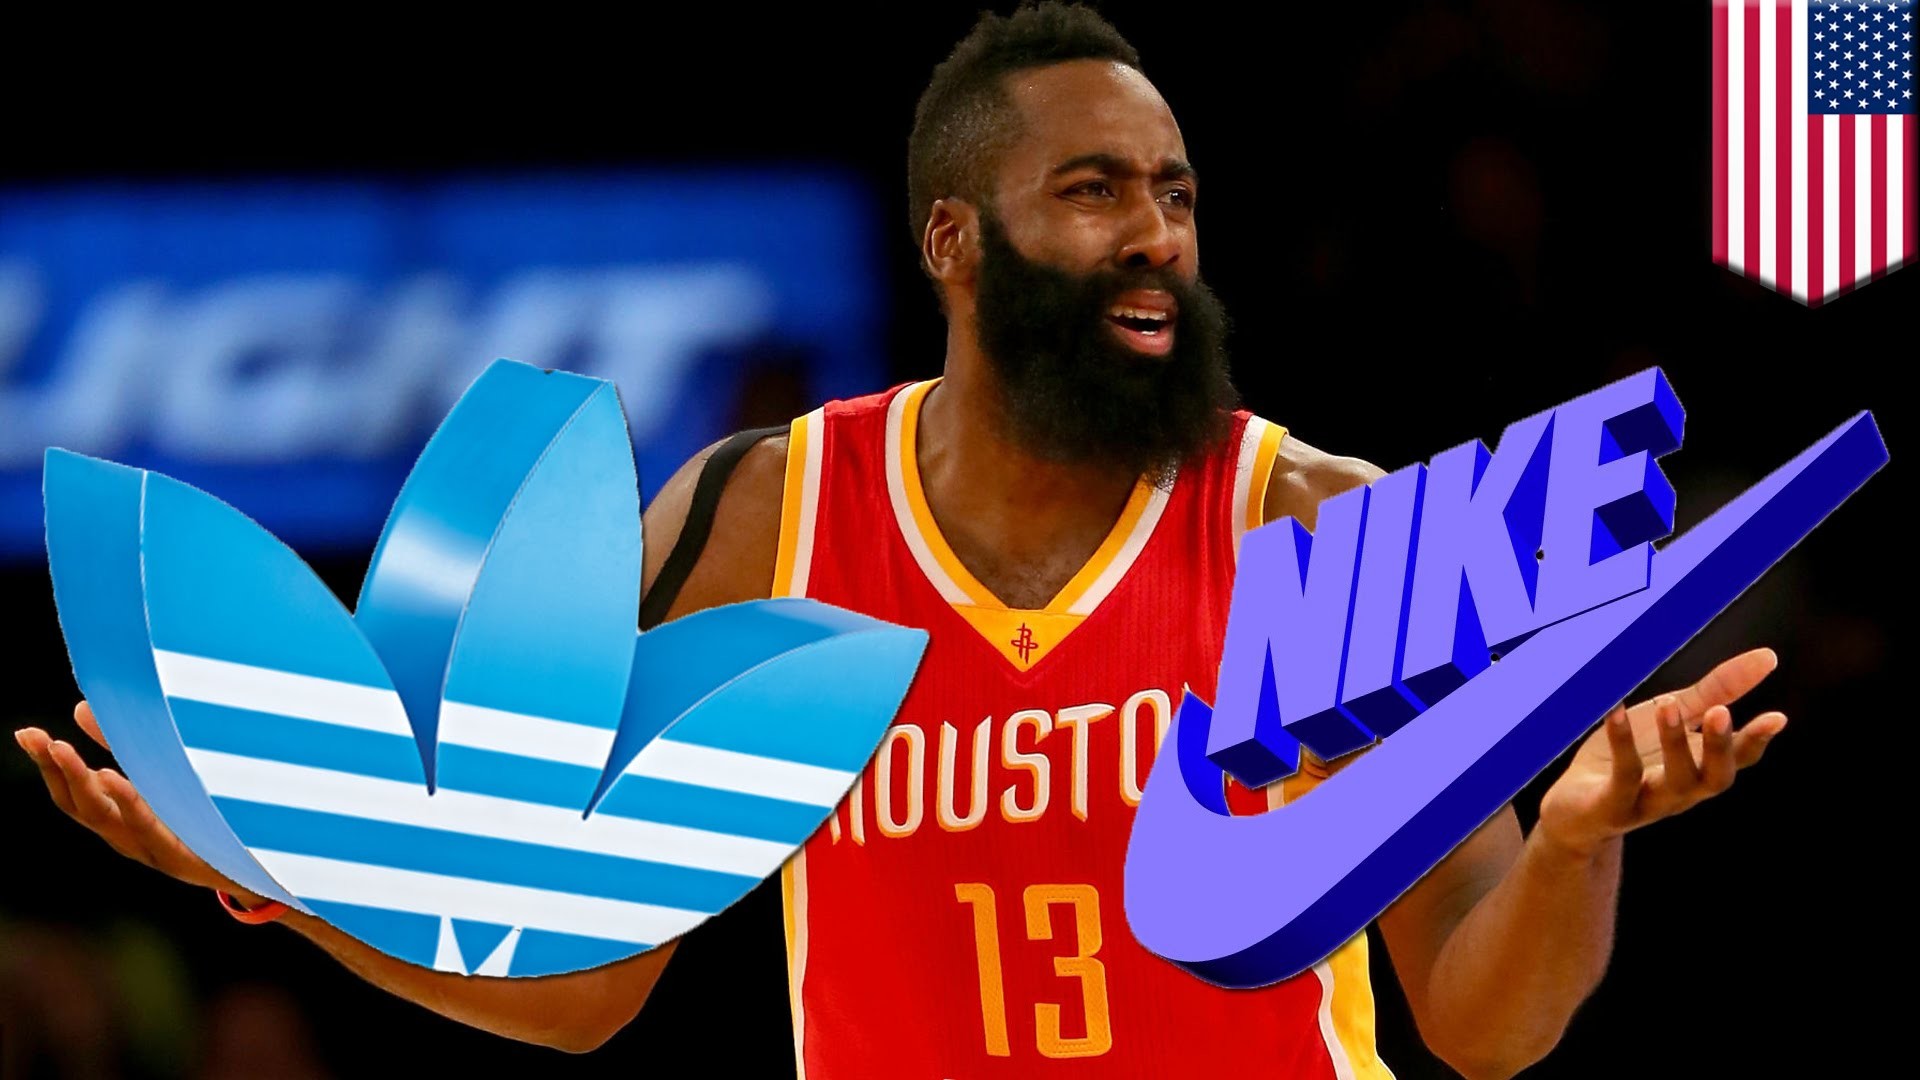 1920x1080 James Harden Adidas deal: The Beard offered $200 million for sneaker  contract - YouTube